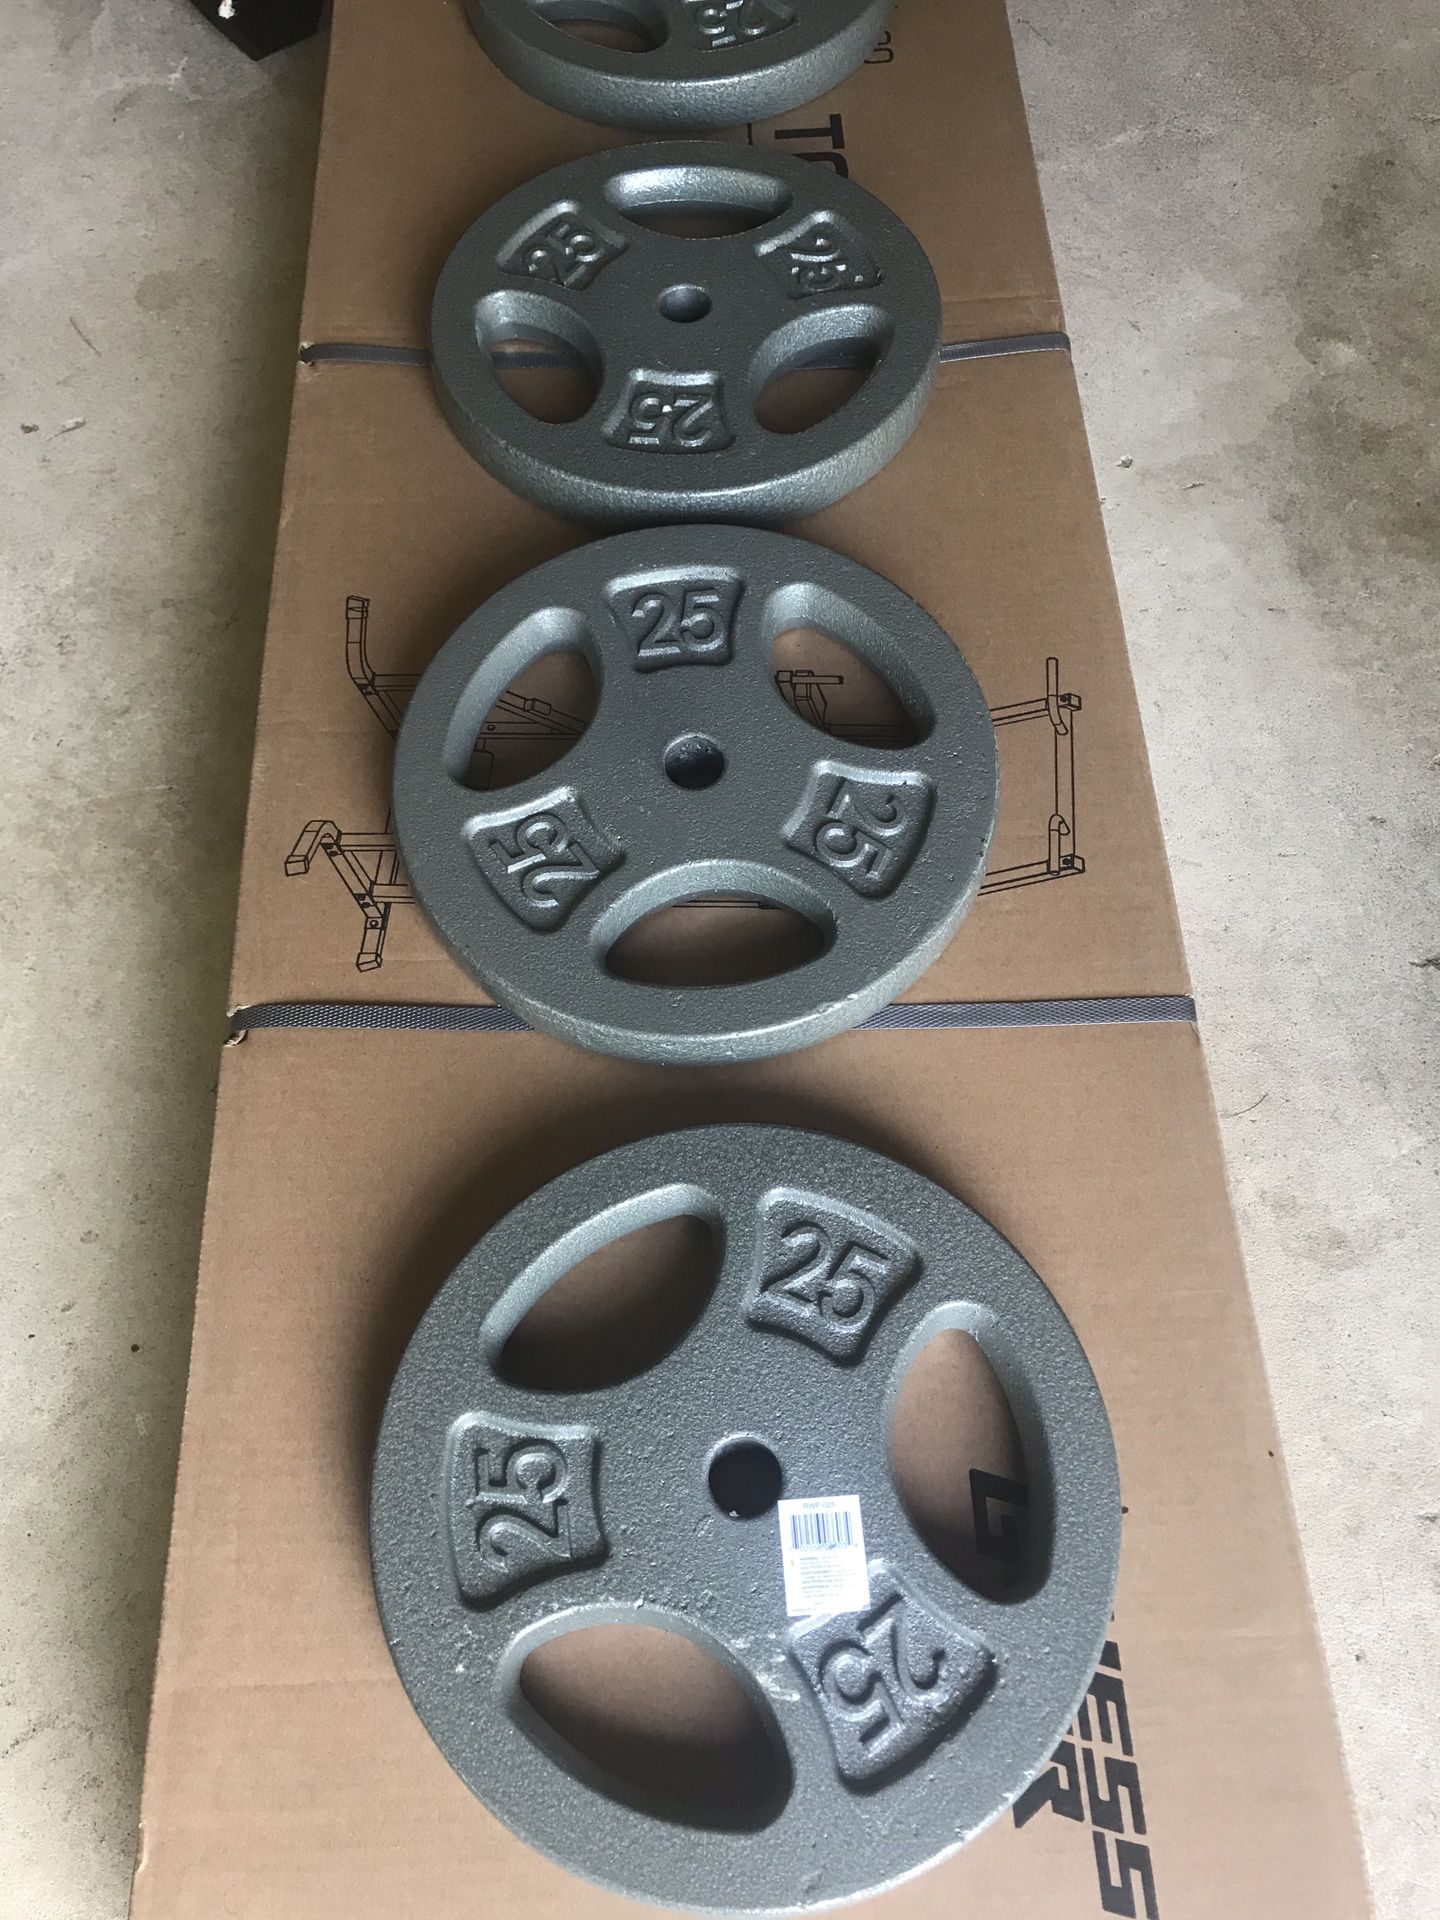 1 inch weights plates 25 lbs